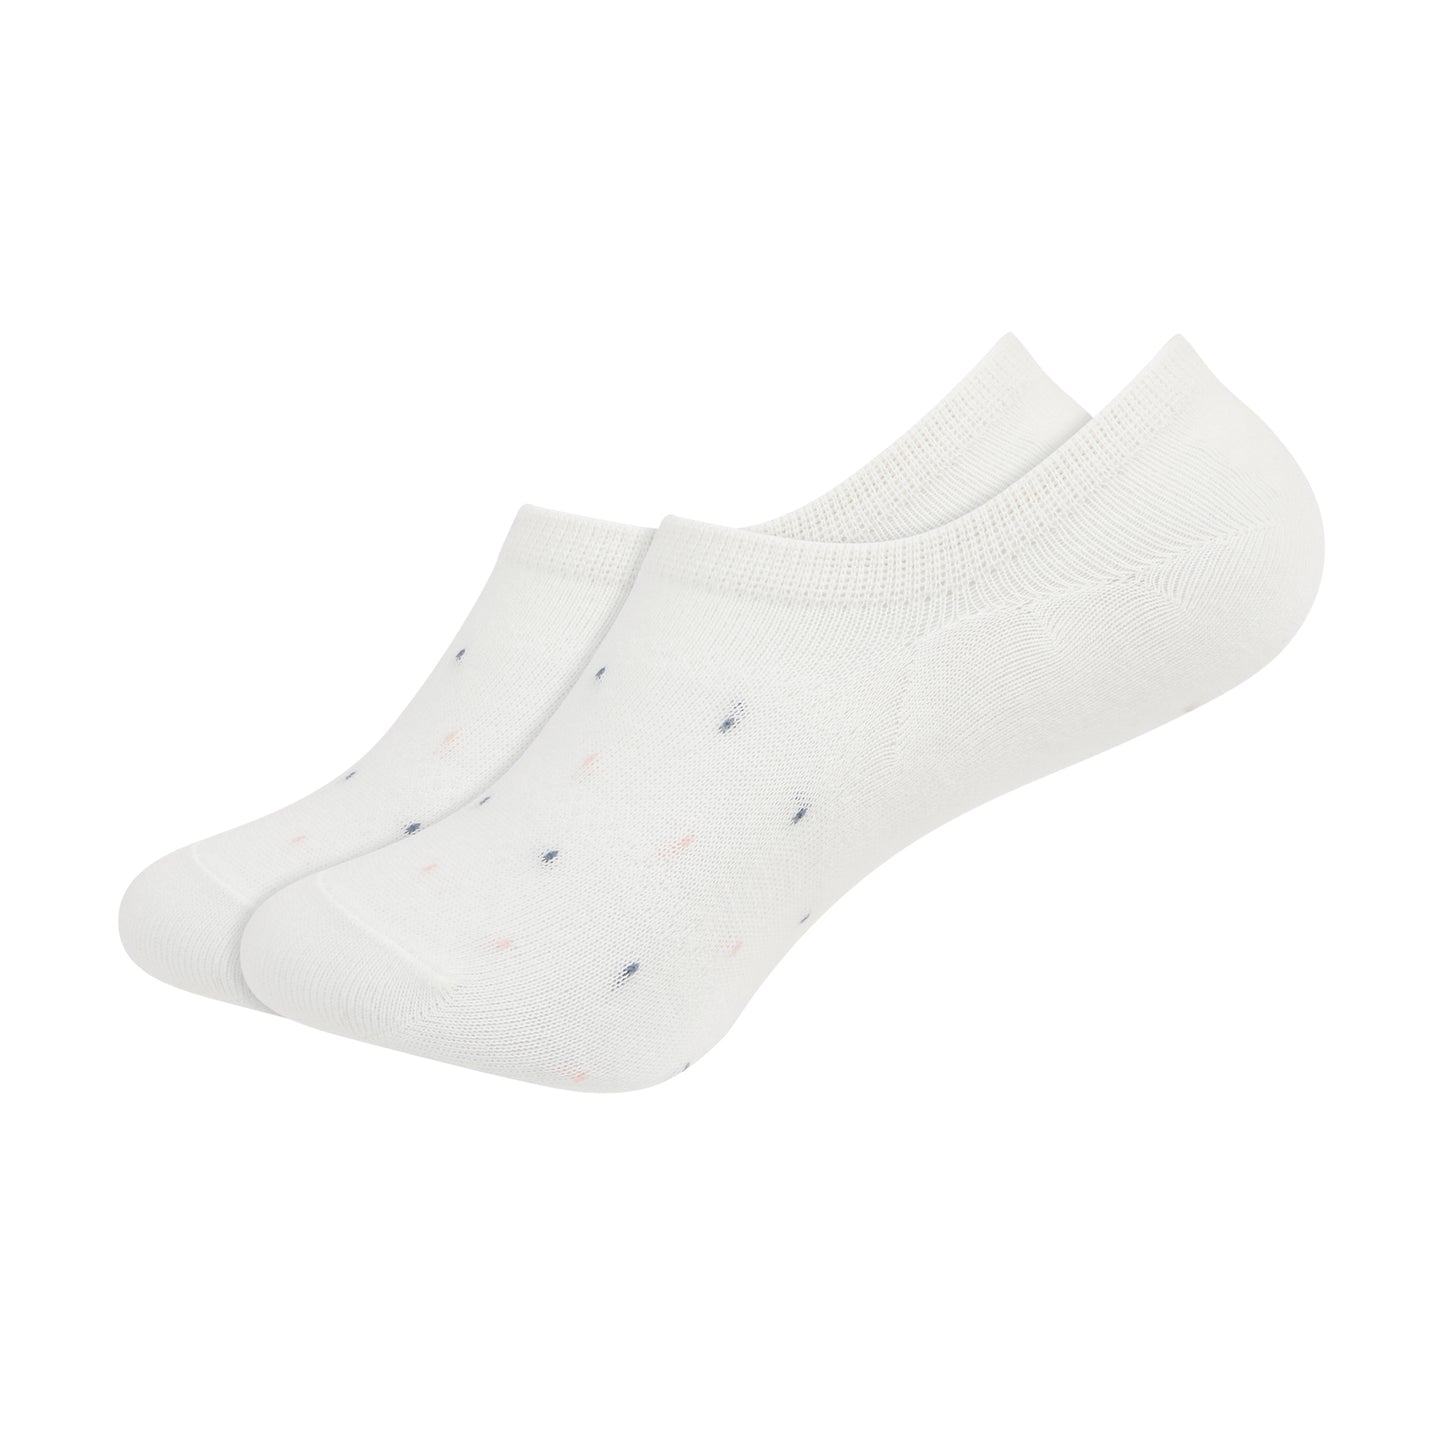 Women's Colored Invisible Dotted Foot Socks - IDENTITY Apparel Shop